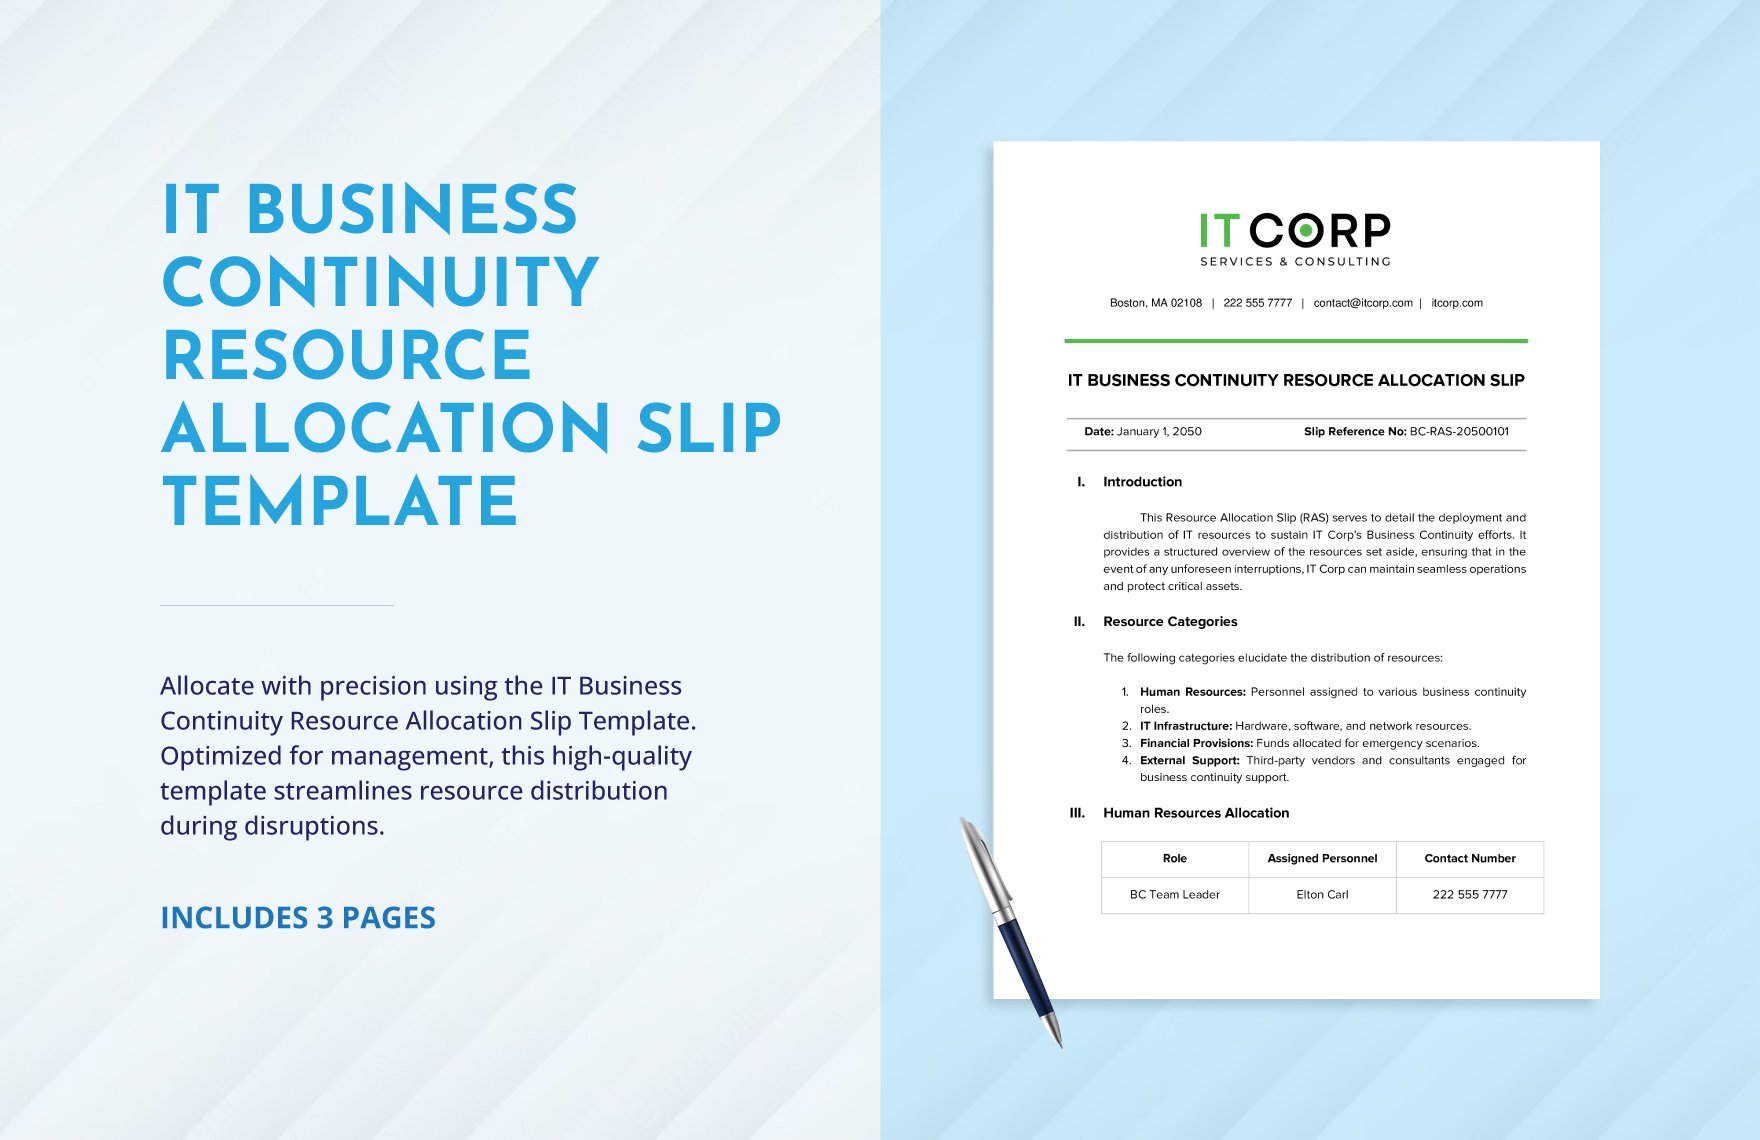 IT Business Continuity Resource Allocation Slip Template